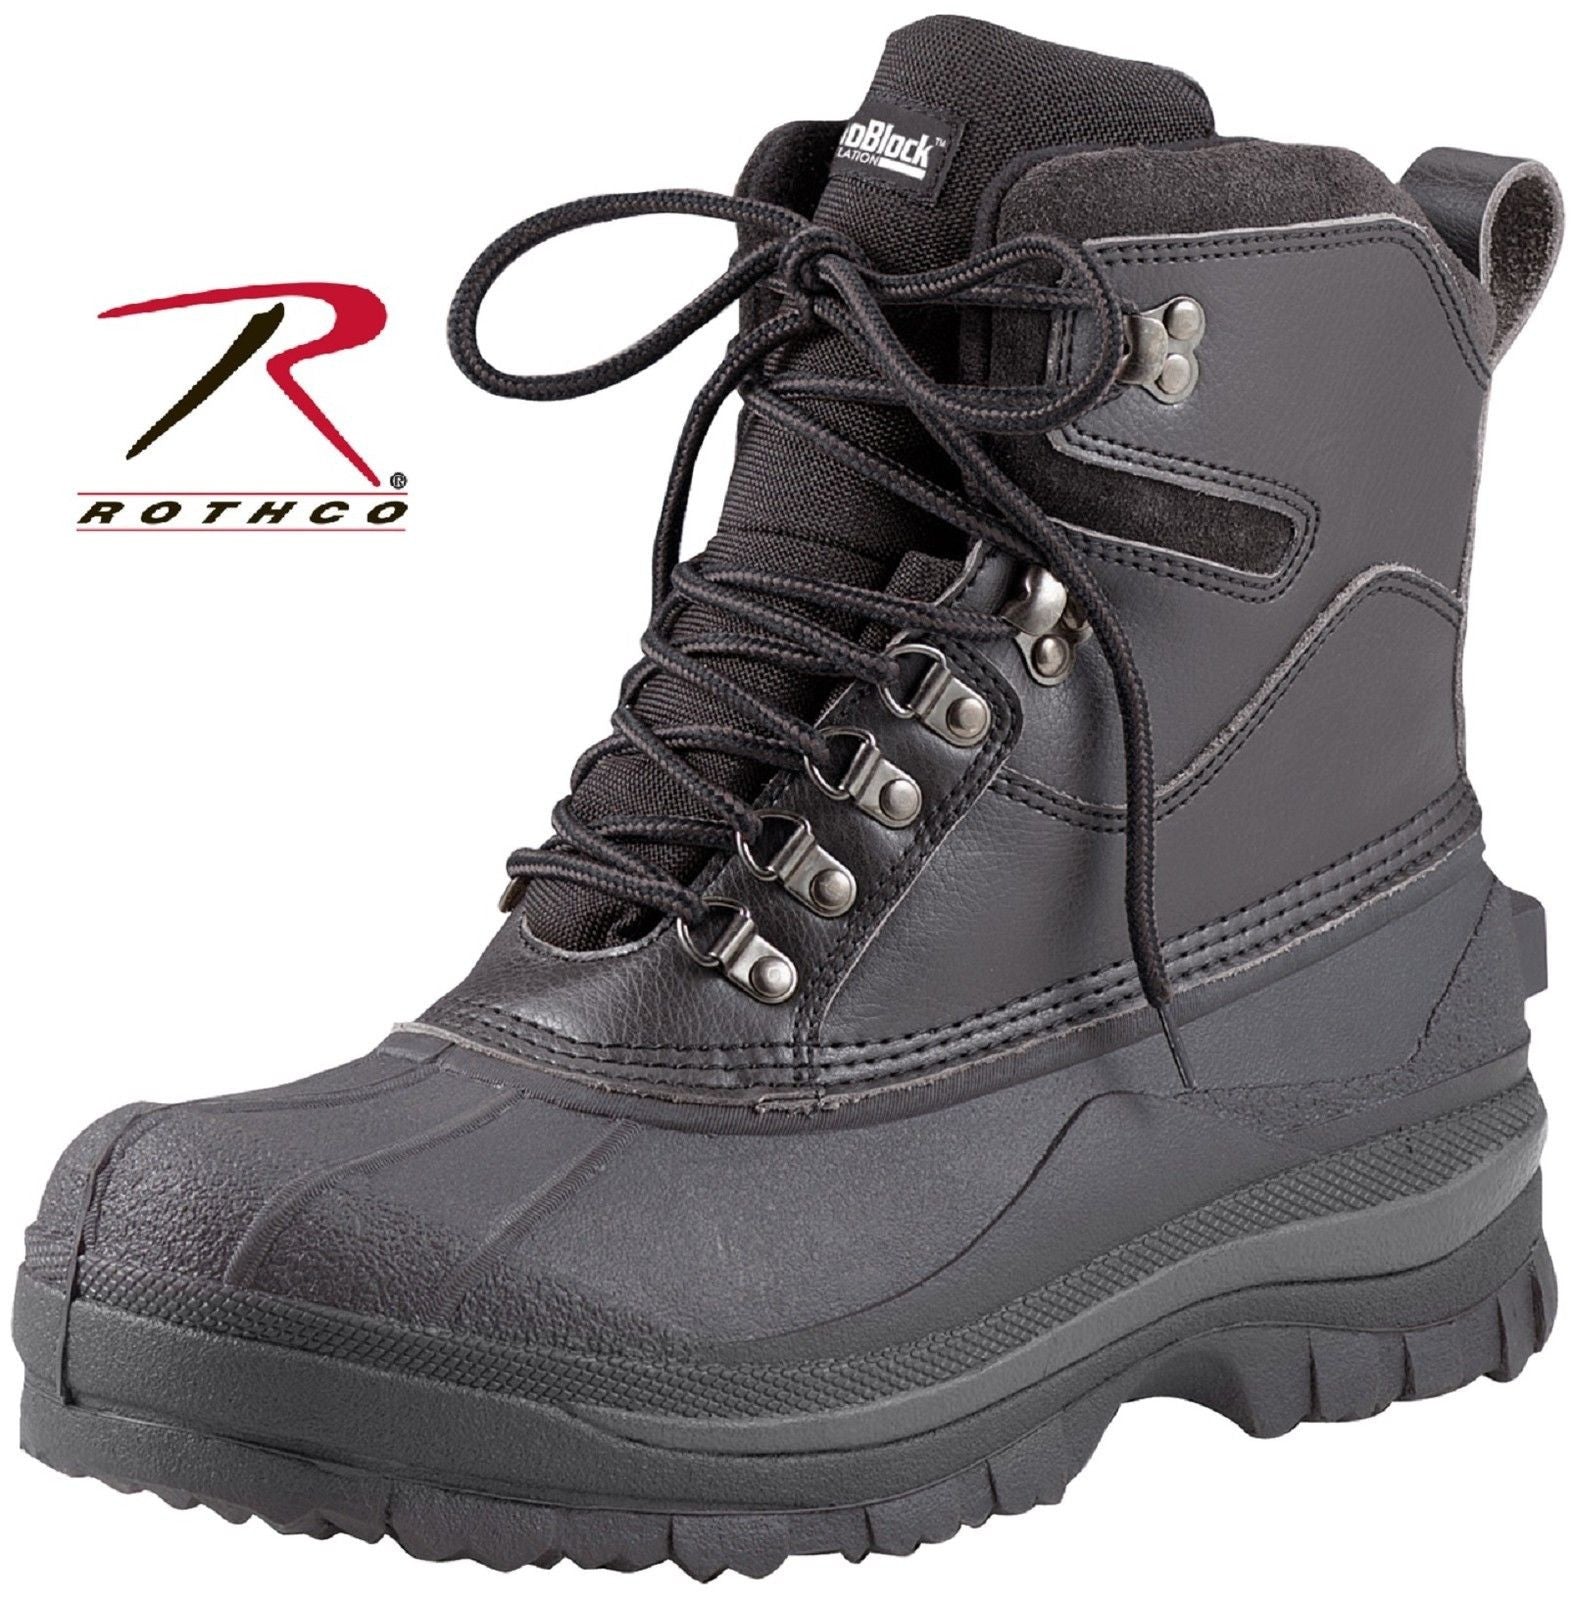 extreme cold weather waterproof boots